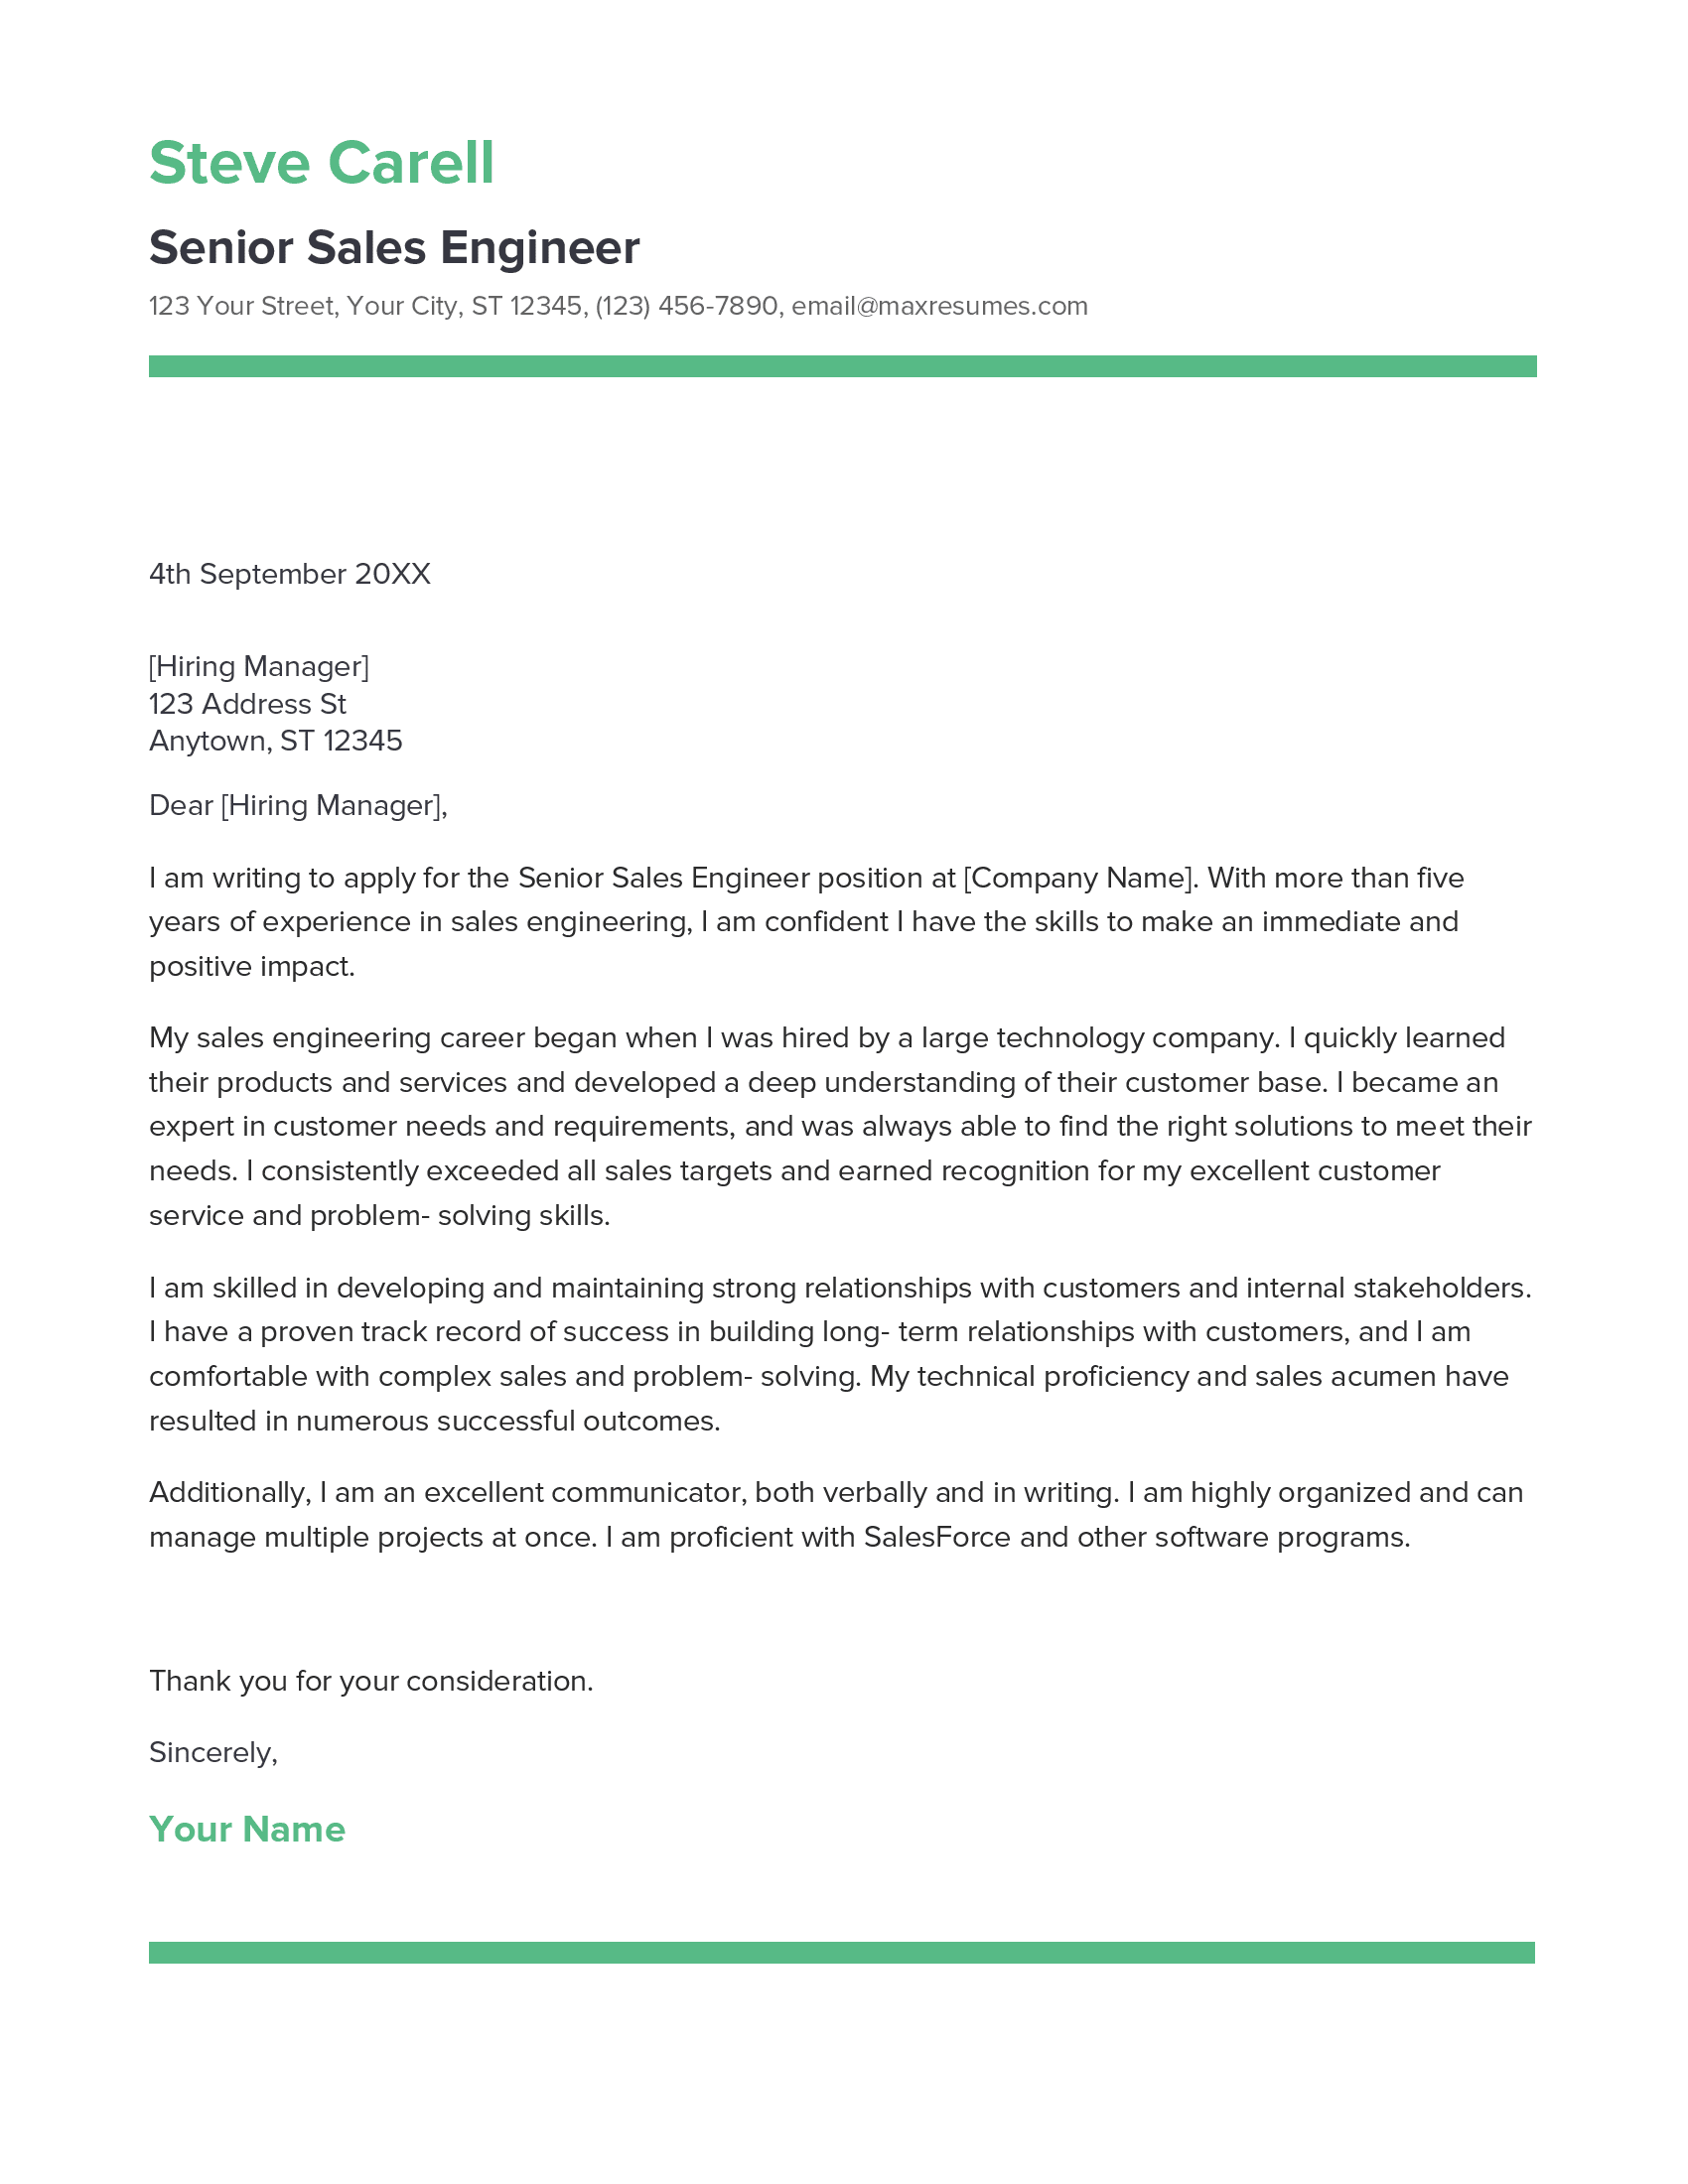 Senior Sales Engineer Cover Letter Example